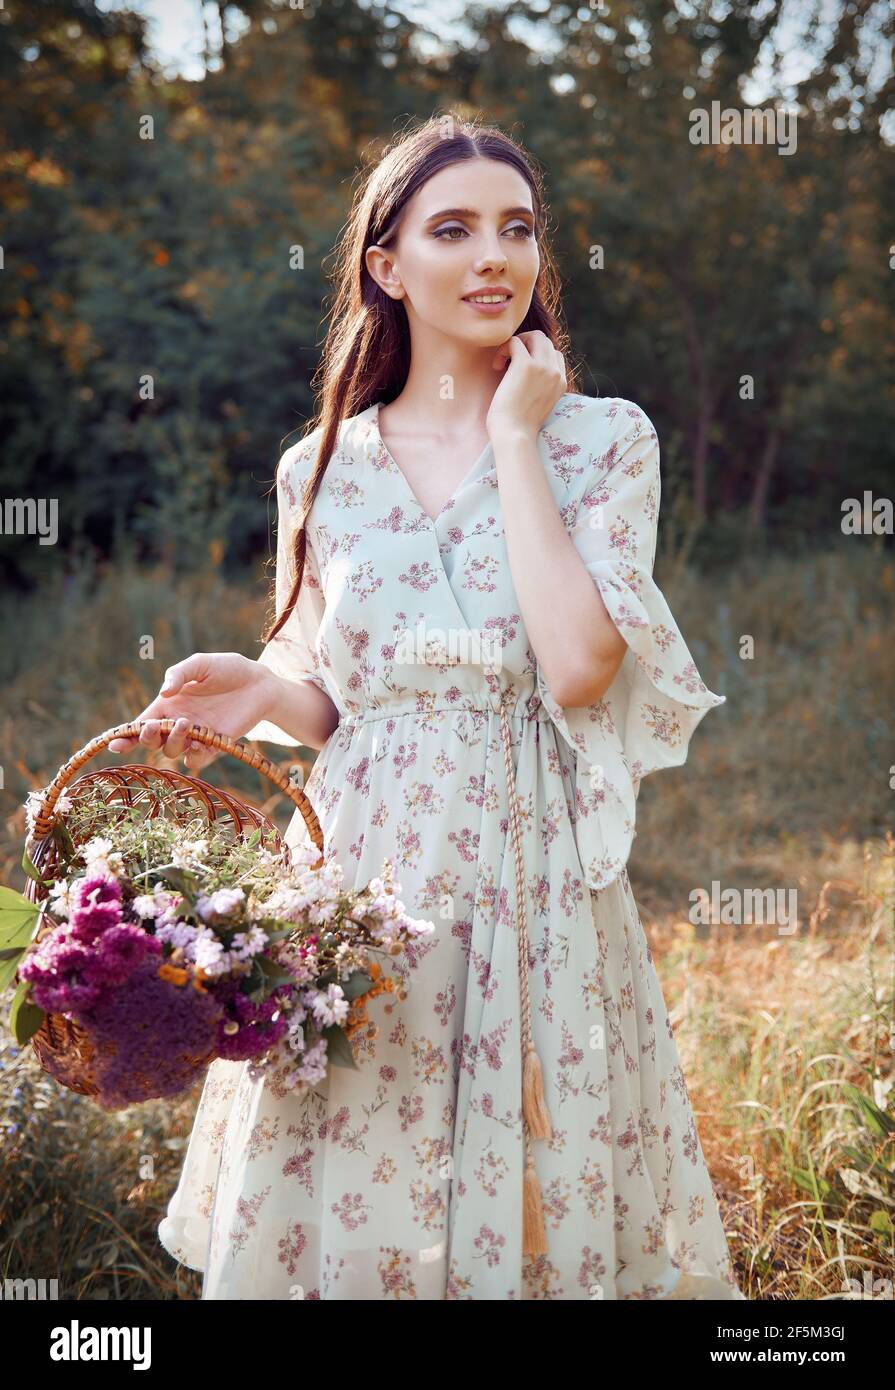 Beautiful smiling young girl in dress holds basket with flowers in hand. Outdoor portrait at meadow Stock Photo